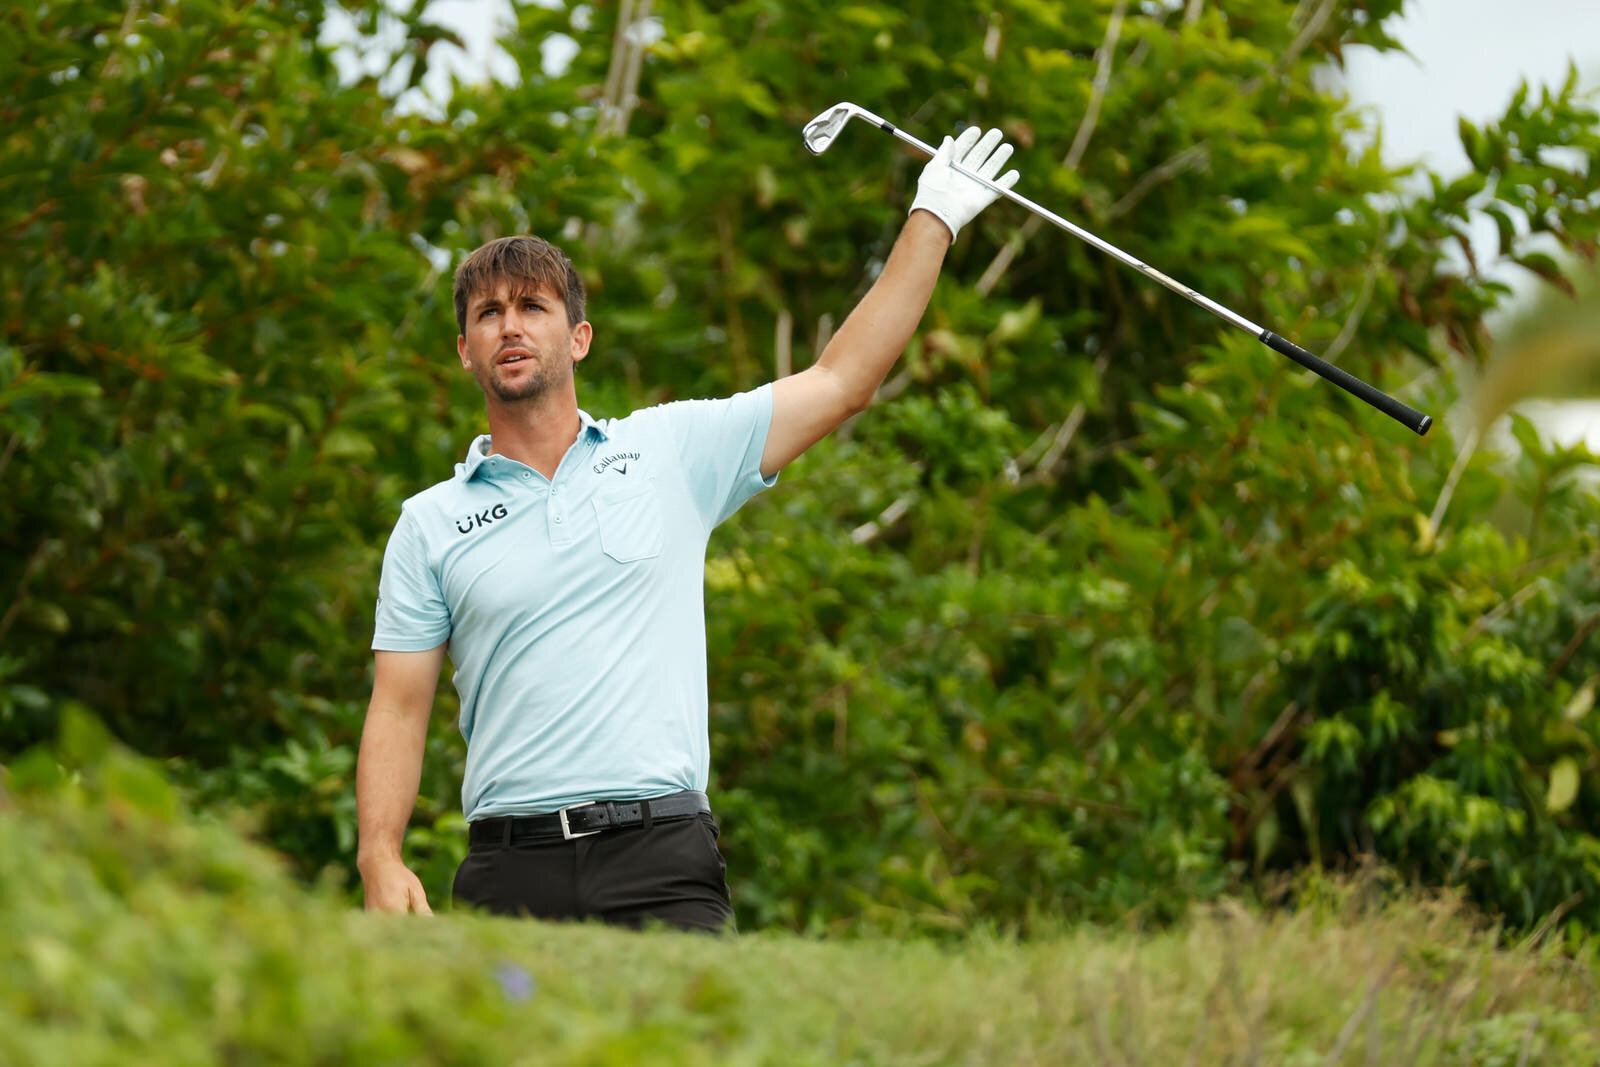  SOUTHAMPTON, BERMUDA - OCTOBER 31: Ollie Schniederjans of the United States reacts to his shot from the eighth tee during the third round of the Bermuda Championship at Port Royal Golf Course on October 31, 2020 in Southampton, Bermuda. (Photo by Gr